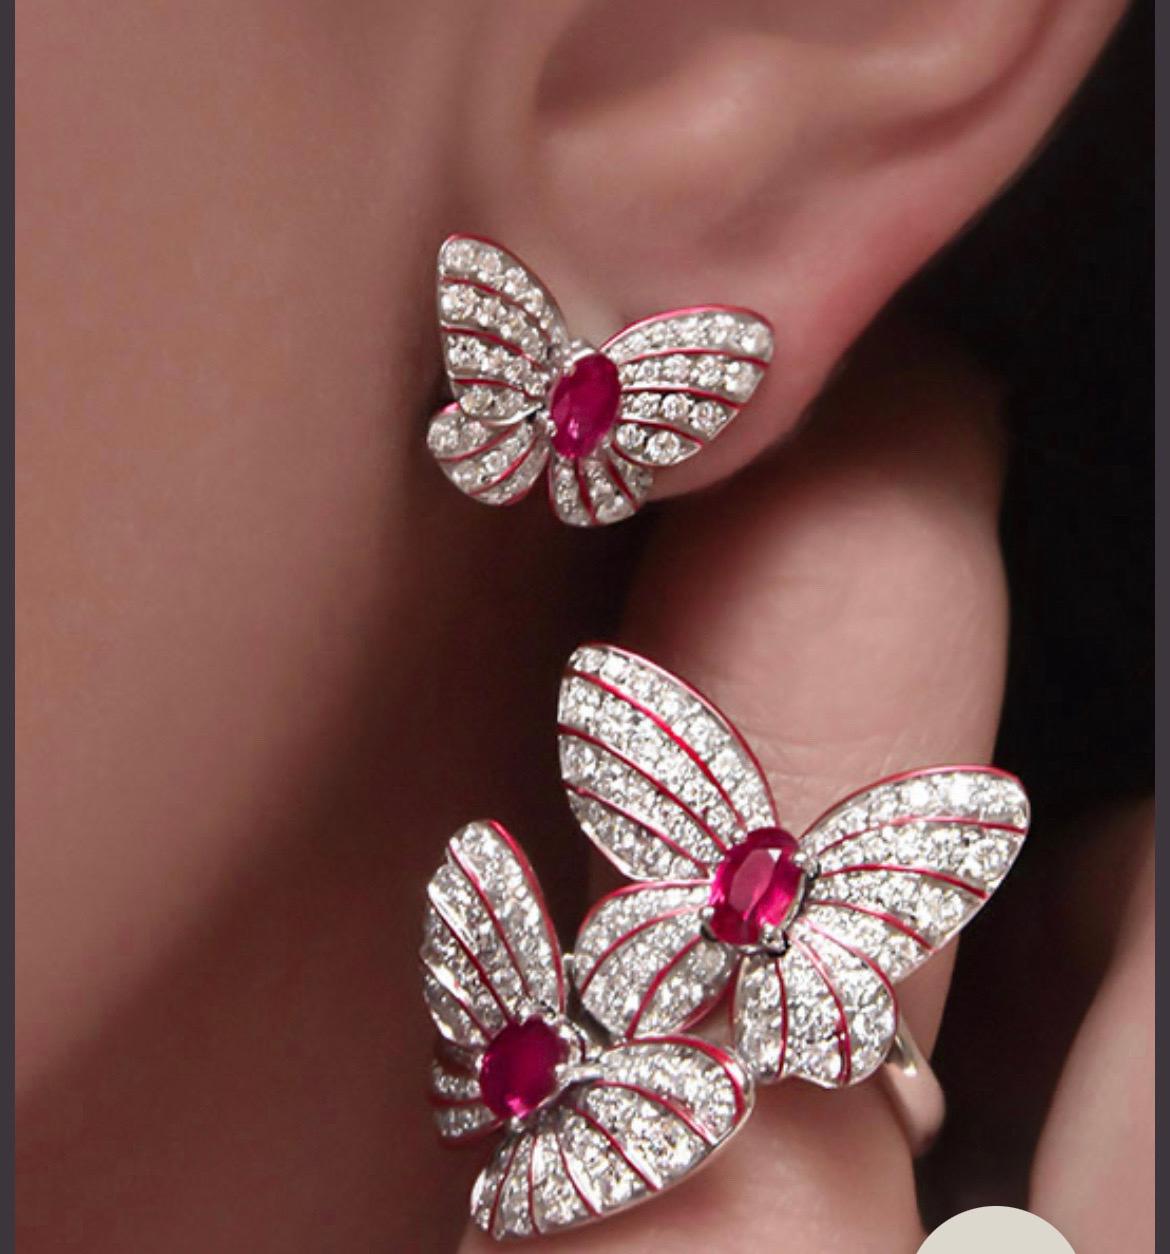 Magnificent 18 karat white gold ring designed with 2 pavé  diamond butterflies. 
Each butterfly centers an oval ruby. The delicacy and vibrancy of the butterfly is further enhanced with hand painted iridescent red enamel.
Total Diamond weight =1.70